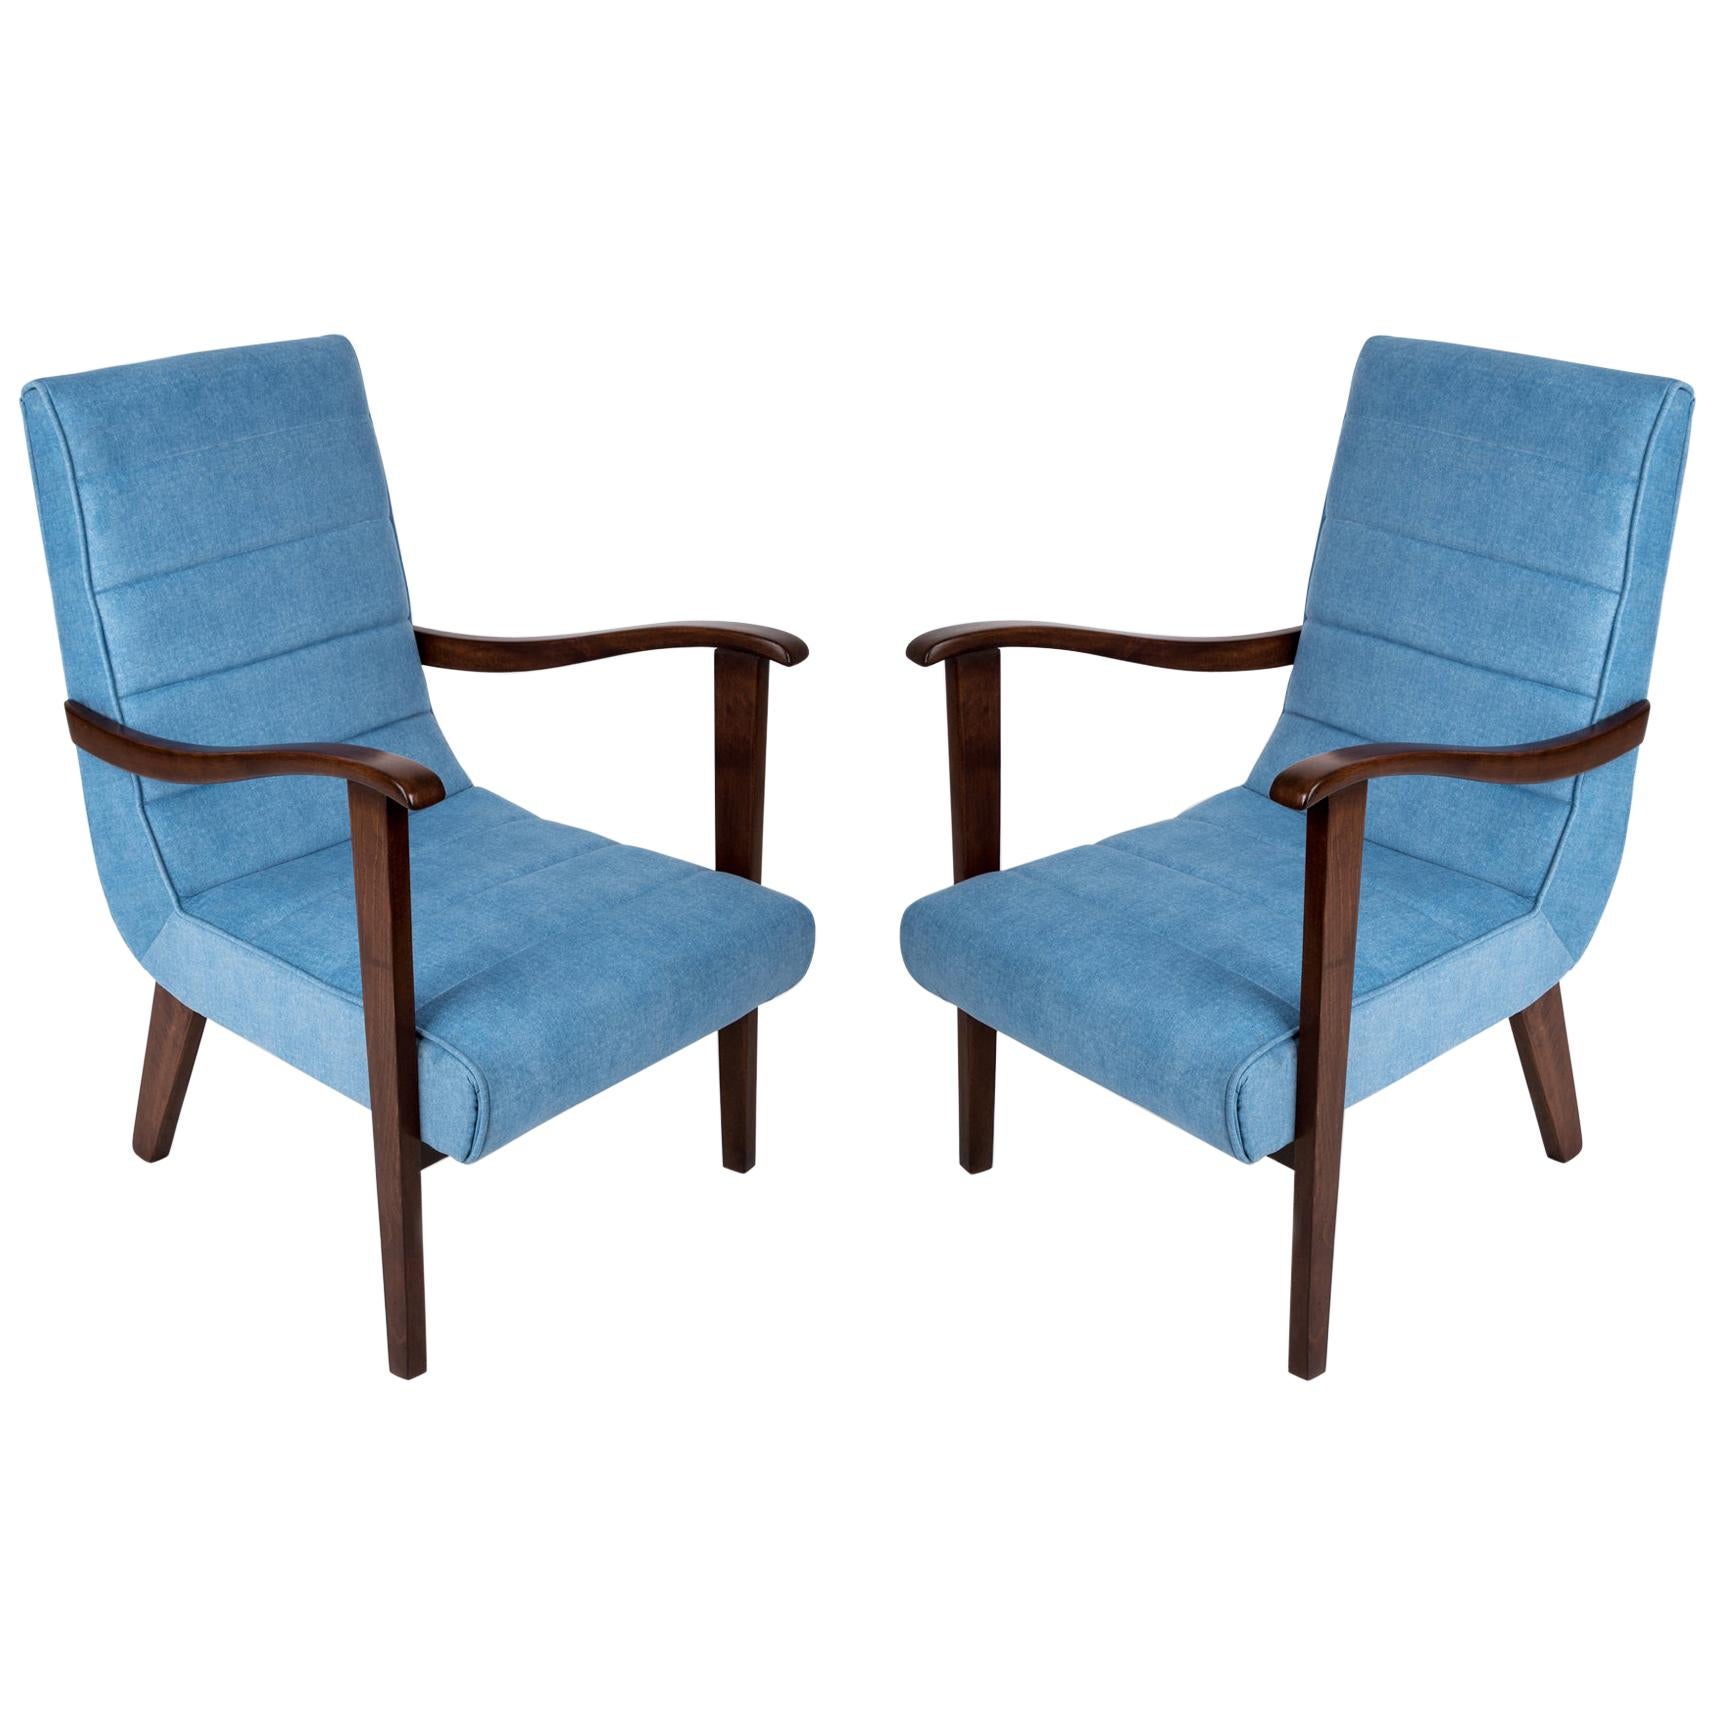 Set of Two Mid-Century Modern Blue Armchairs by Prudnik Factory, 1960s, Poland